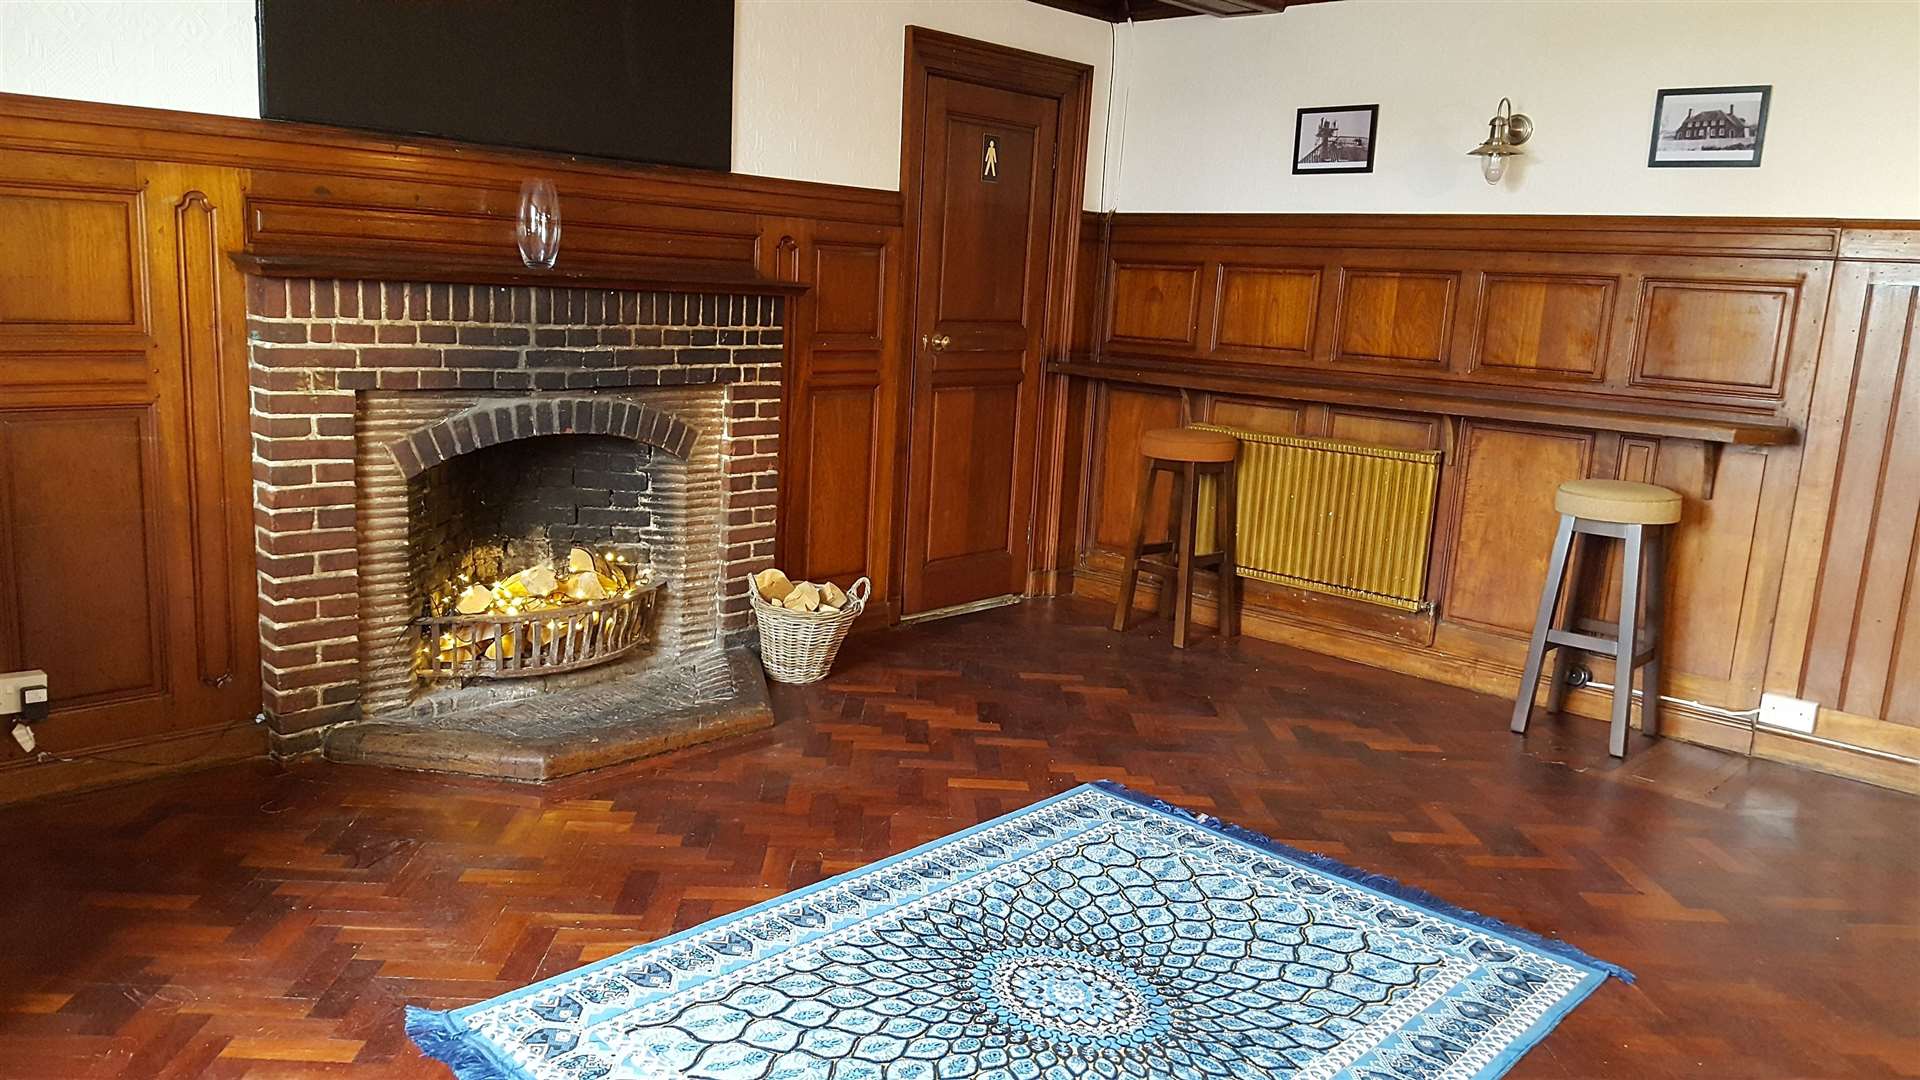 The pub's carpeting has been removed, to make way for wooden floors